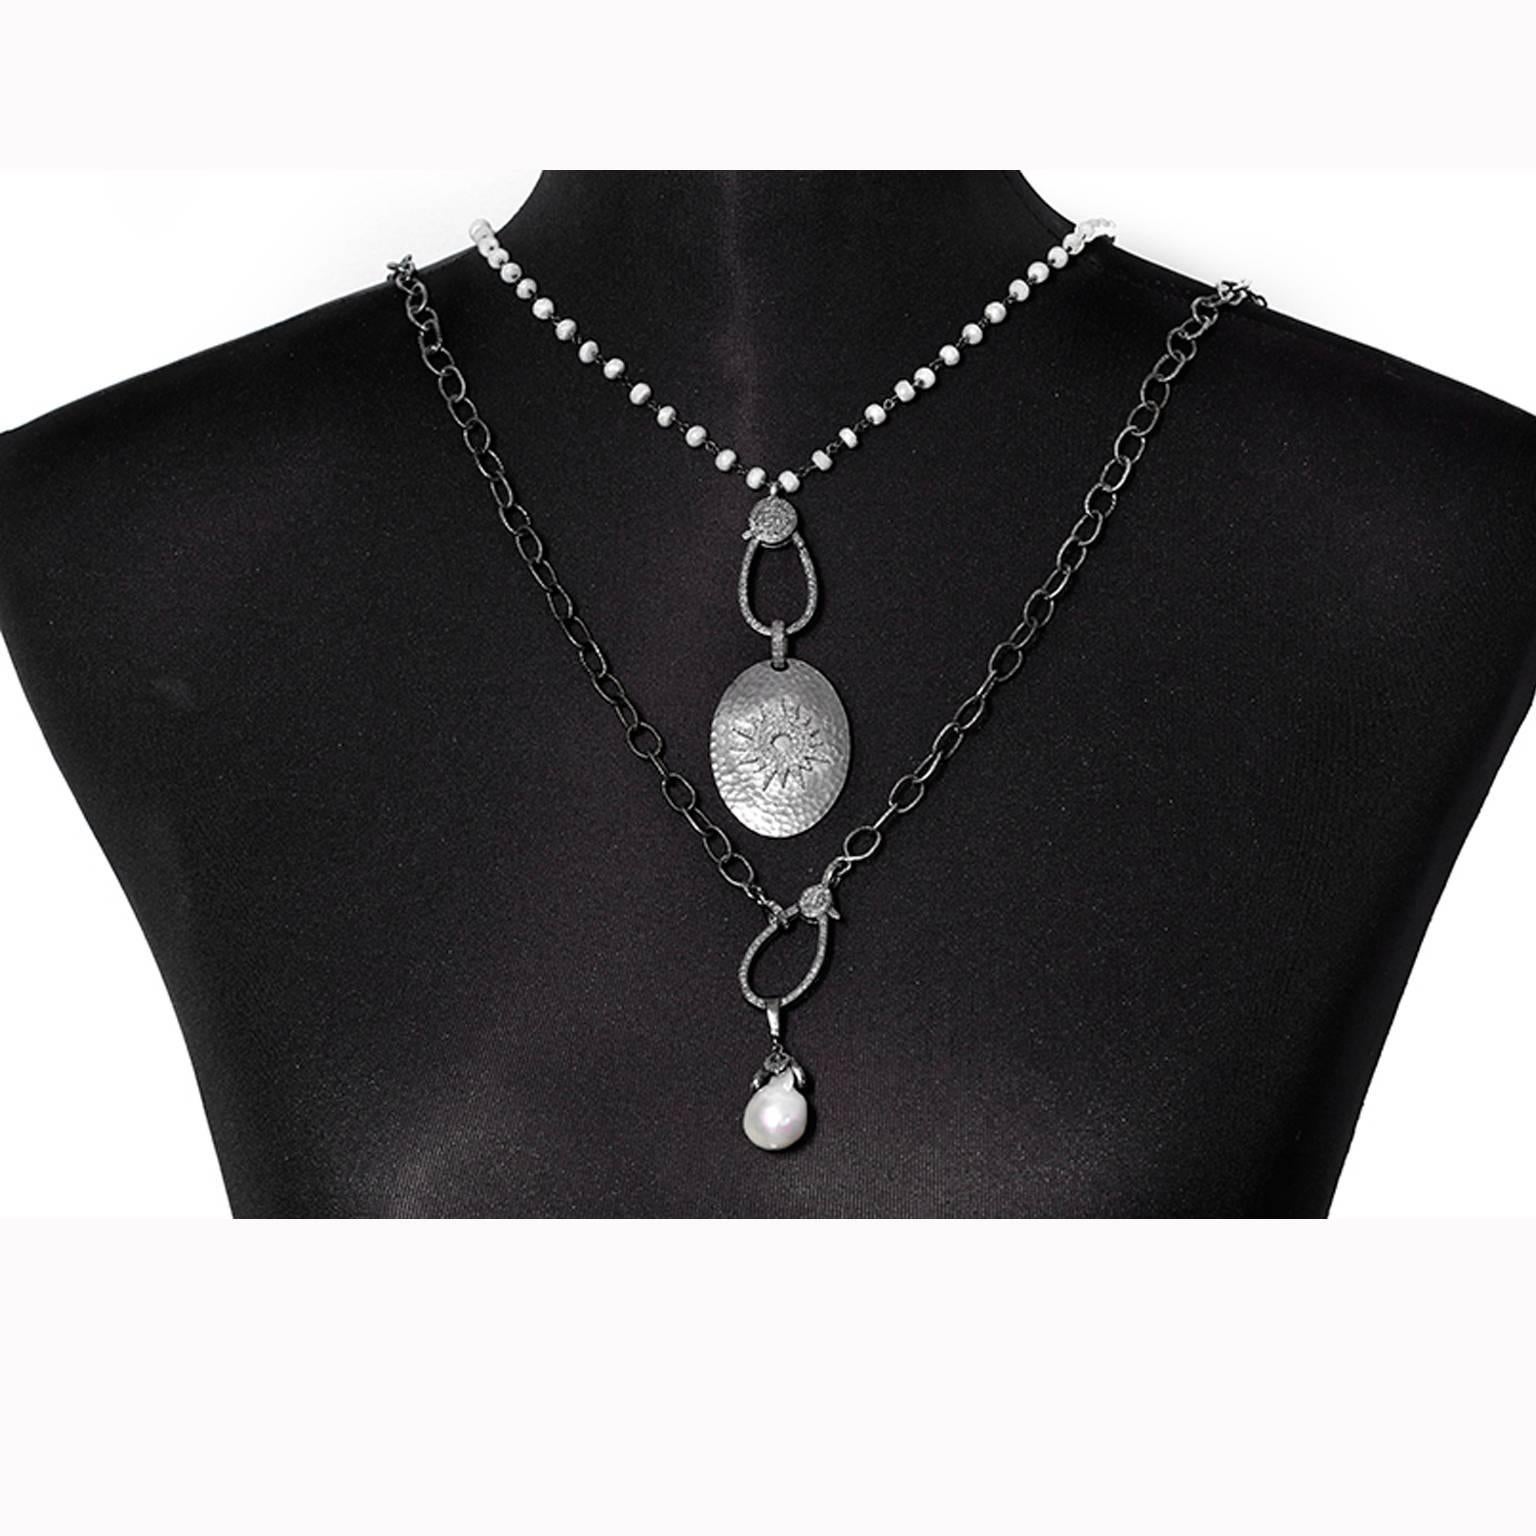 Stunning Sterling Silver, Diamond, Pearl, White Sapphire and Necklace Set - This stunning set features two necklaces that can also be worn individually. The longer necklace features a pearl, diamonds, set in oxidized sterling silver on a 35-inch